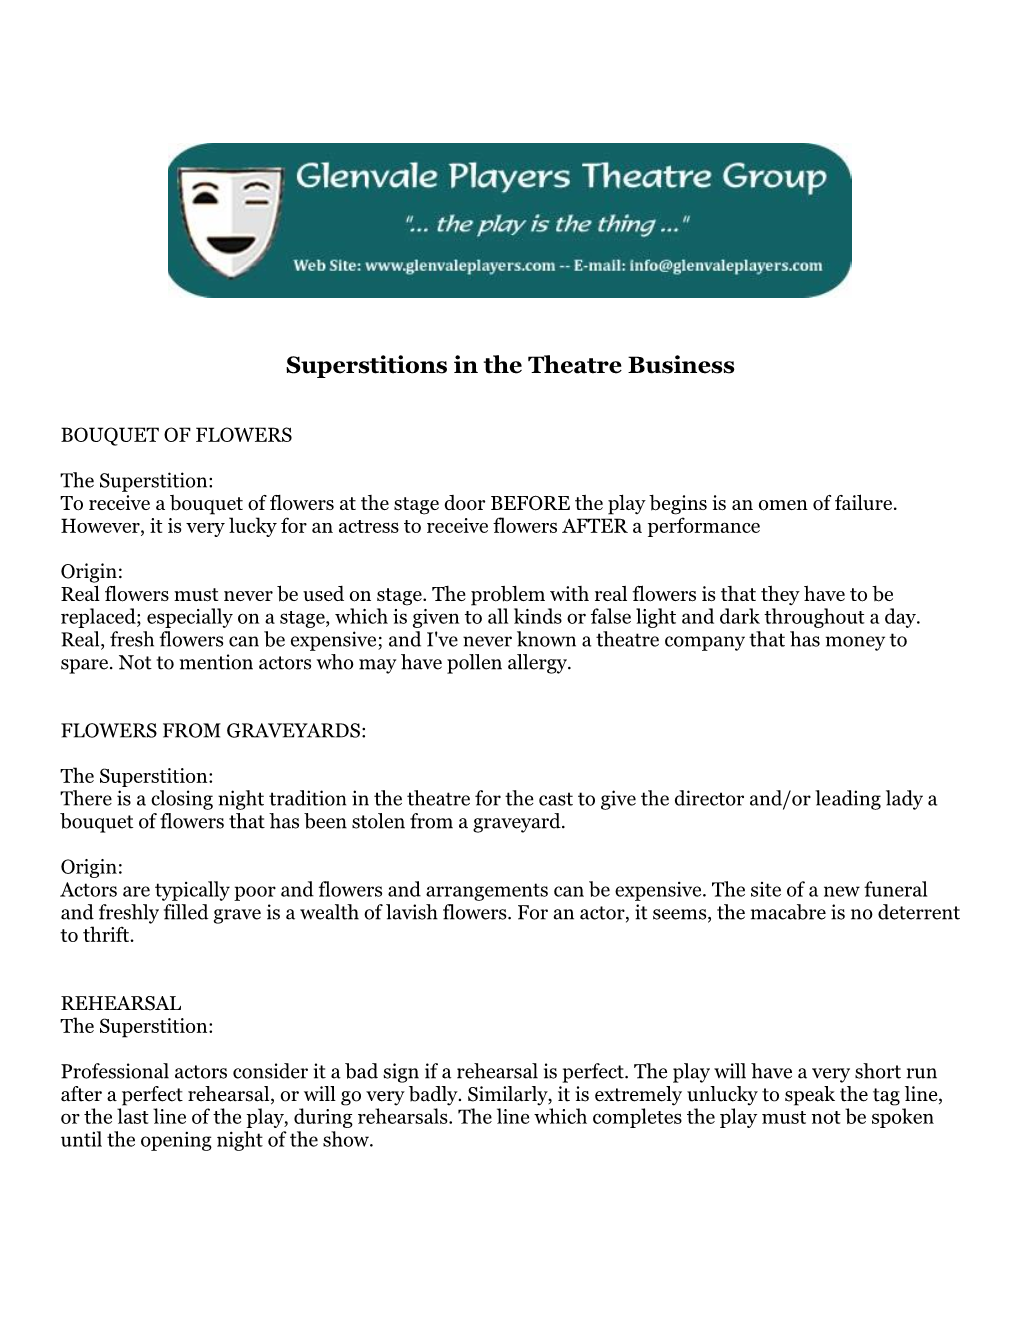 Superstitions in the Theatre Business